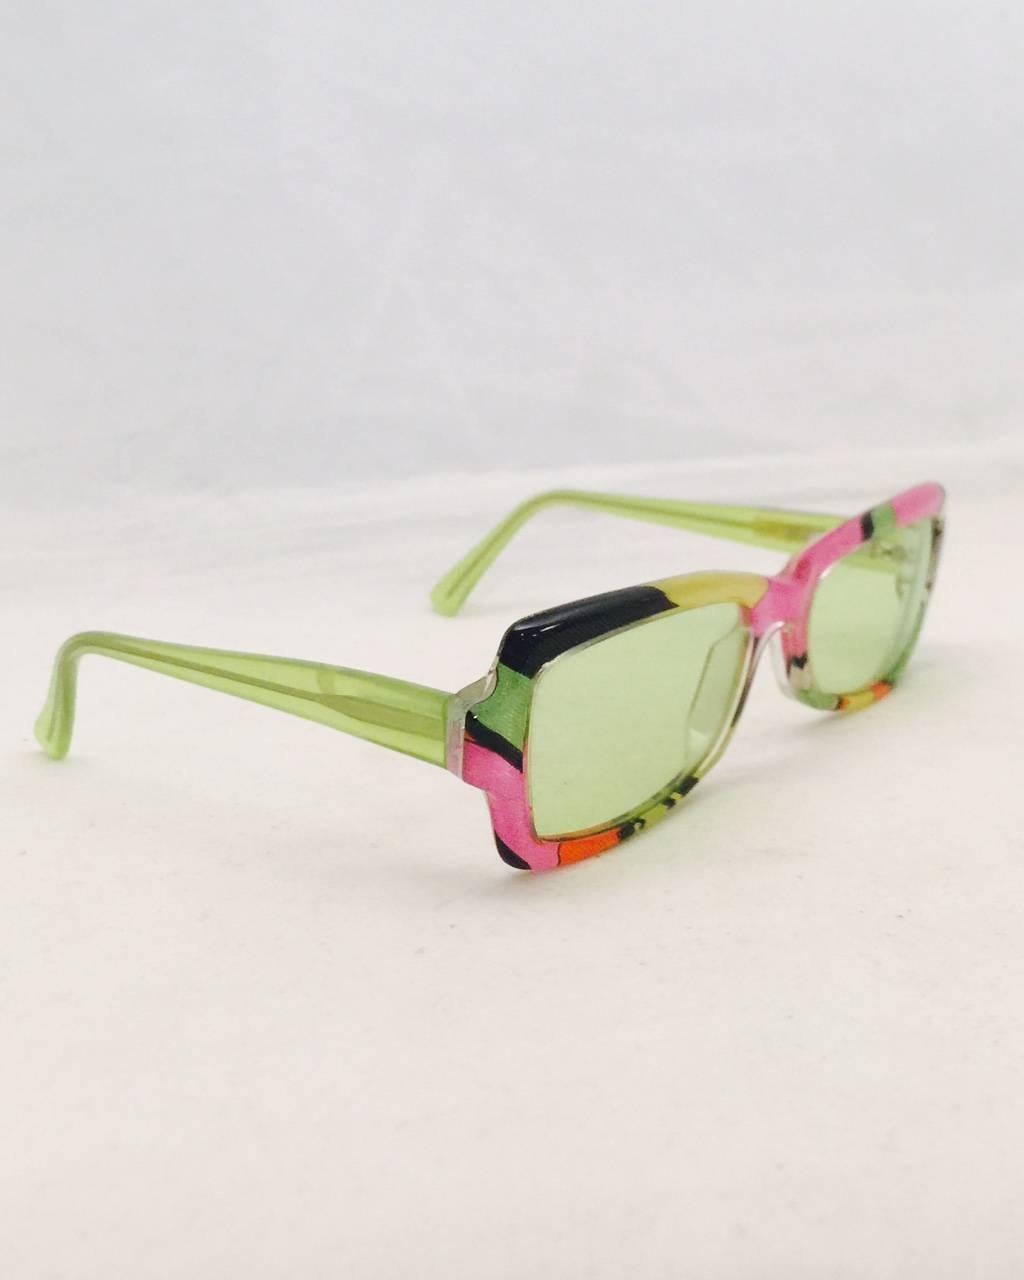 Pining for Pucci? This vintage pair of iconic green, pink and orange signature print sunglasses by Emilio Pucci are a must for any 